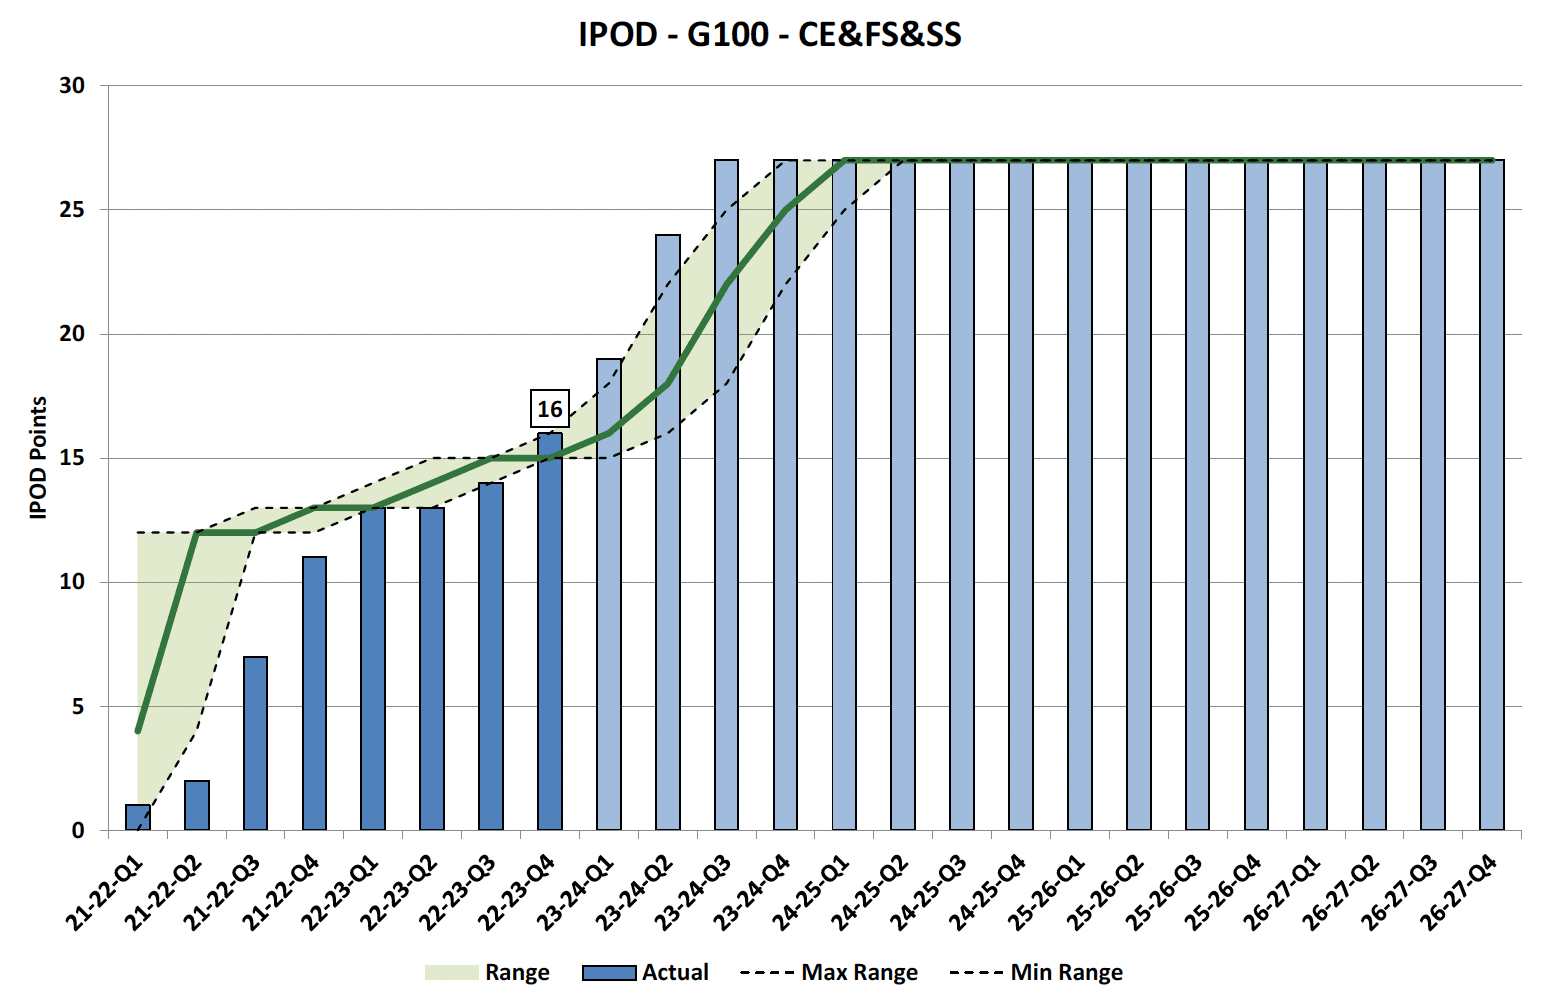 Chart showing IPOD points achieved or forecast for Project Acceptance milestone against target range for all projects in CE&FS&SS Portfolio